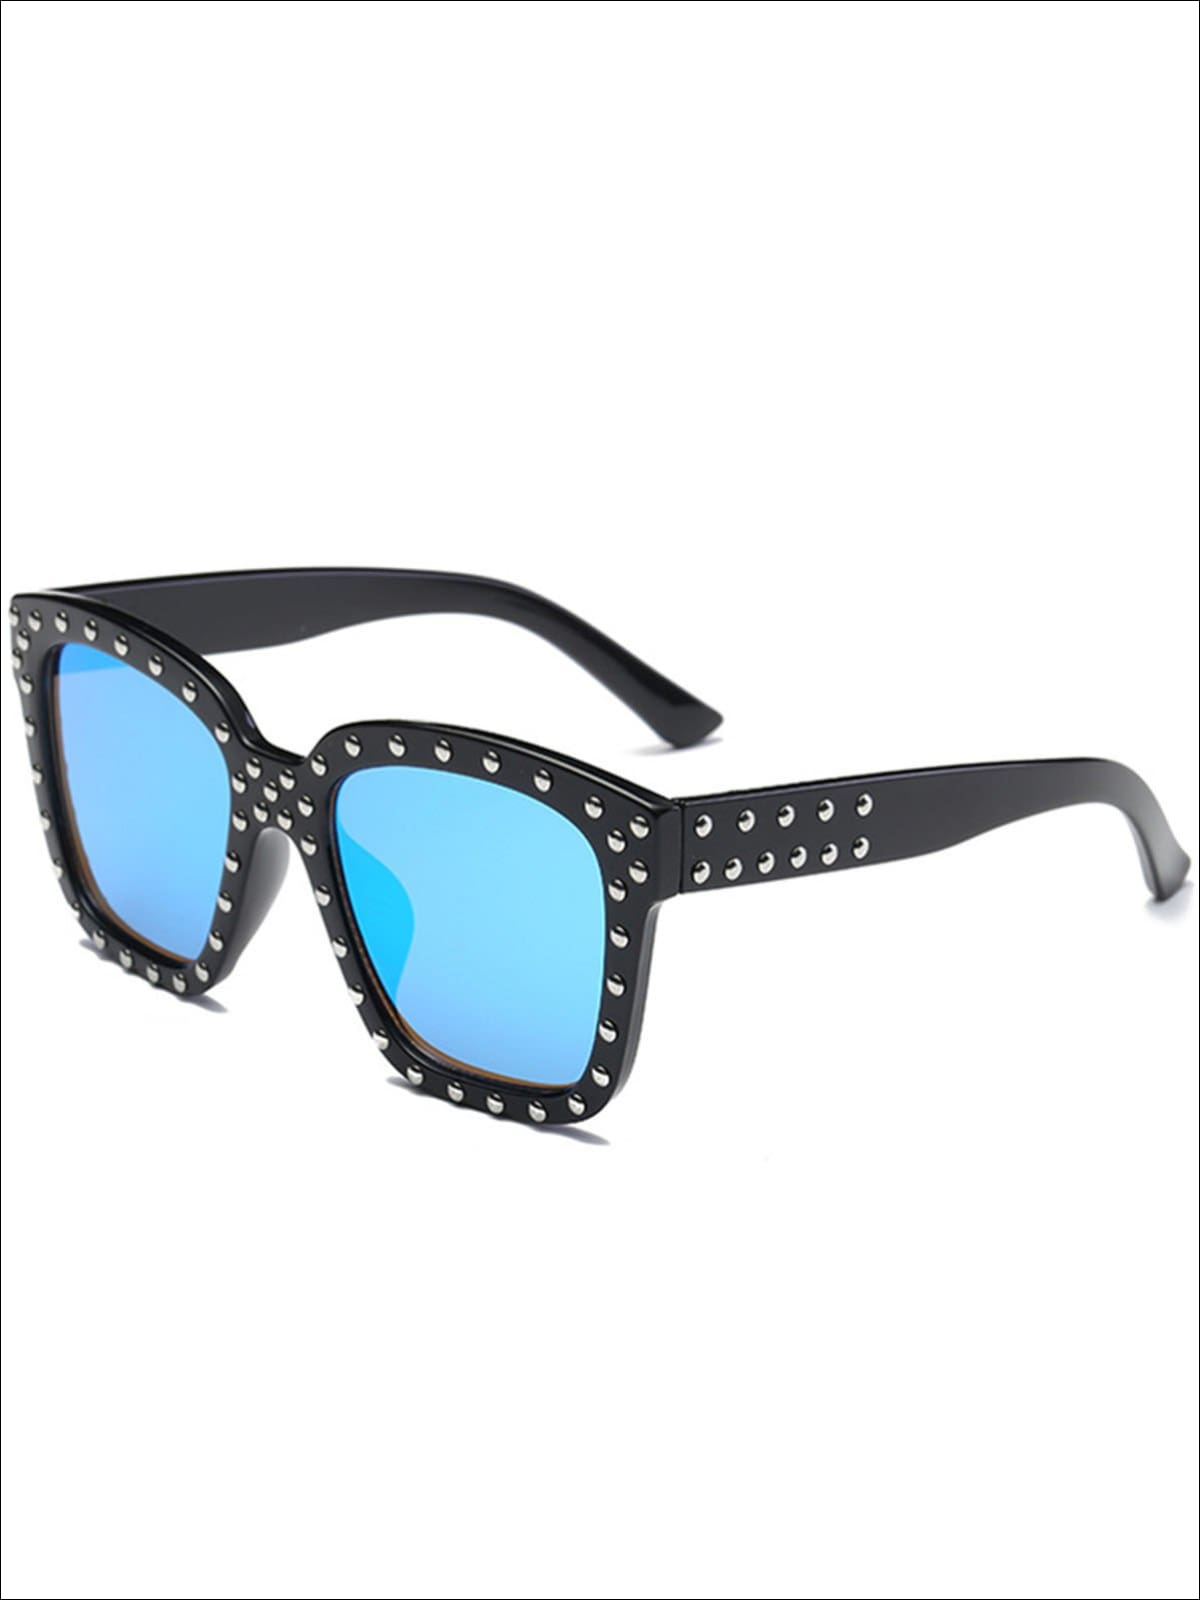 Girls Studded Square Frame Sunglasses - Blue - Girls Accessories